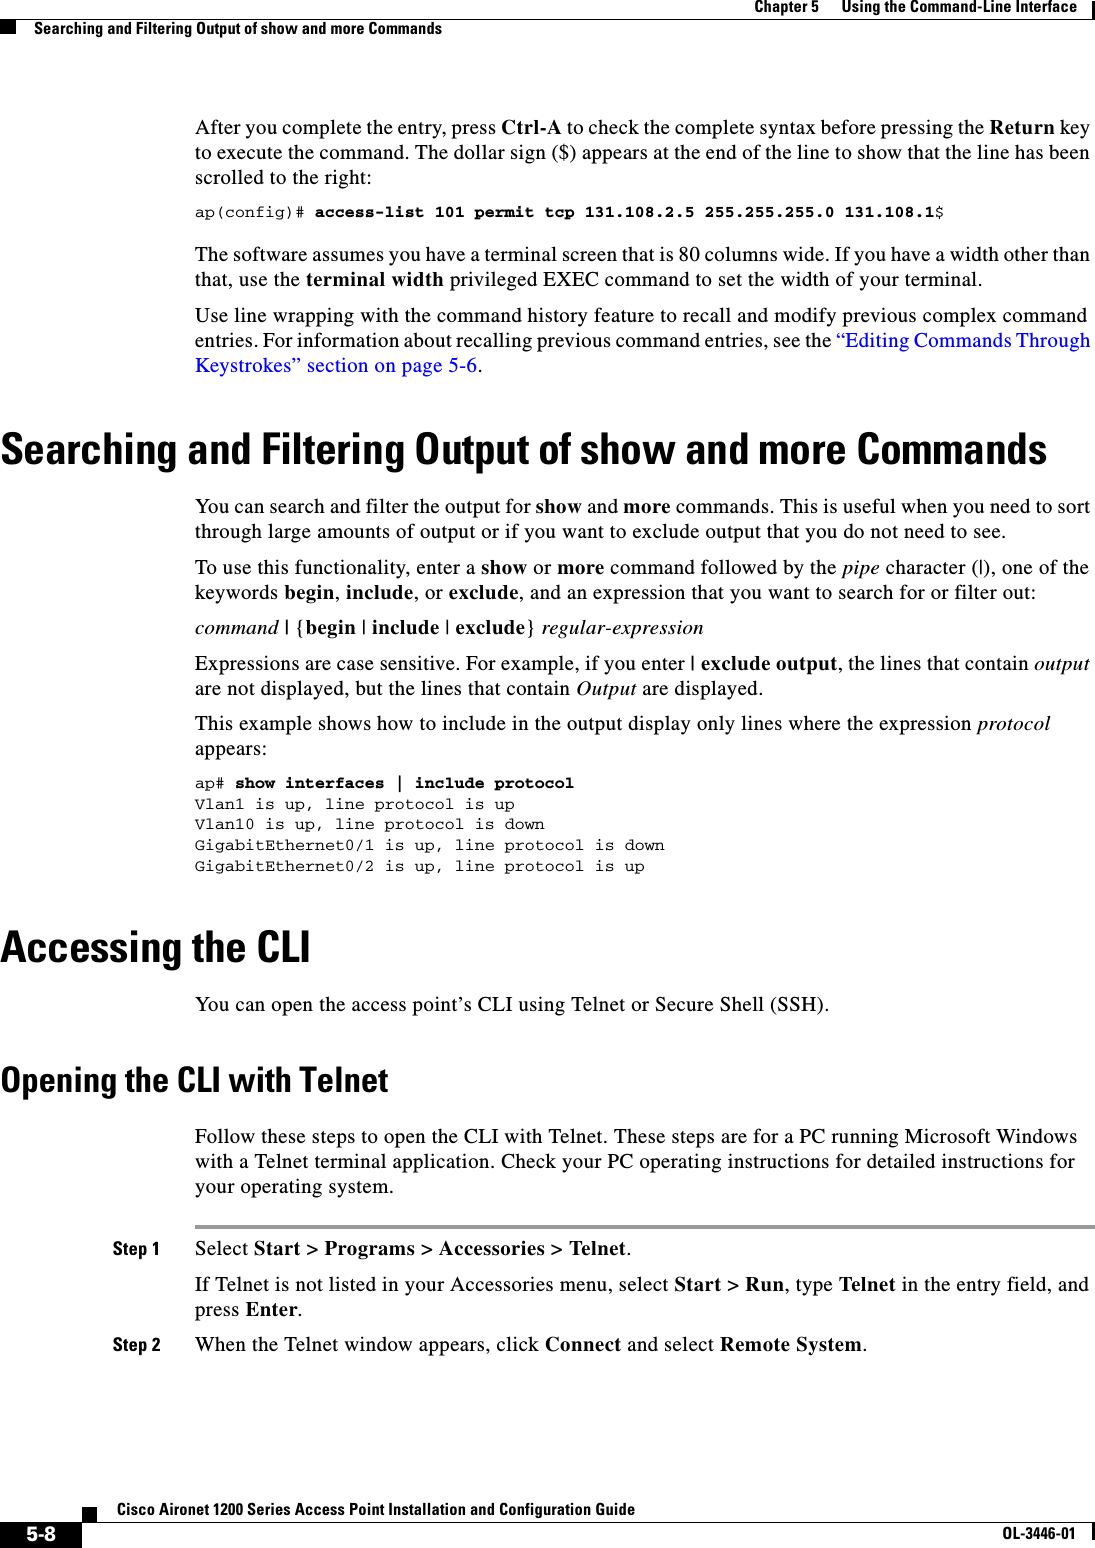 5-8Cisco Aironet 1200 Series Access Point Installation and Configuration GuideOL-3446-01Chapter 5      Using the Command-Line InterfaceSearching and Filtering Output of show and more CommandsAfter you complete the entry, press Ctrl-A to check the complete syntax before pressing the Return key to execute the command. The dollar sign ($) appears at the end of the line to show that the line has been scrolled to the right:ap(config)# access-list 101 permit tcp 131.108.2.5 255.255.255.0 131.108.1$The software assumes you have a terminal screen that is 80 columns wide. If you have a width other than that, use the terminal width privileged EXEC command to set the width of your terminal.Use line wrapping with the command history feature to recall and modify previous complex command entries. For information about recalling previous command entries, see the “Editing Commands Through Keystrokes” section on page 5-6.Searching and Filtering Output of show and more CommandsYou can search and filter the output for show and more commands. This is useful when you need to sort through large amounts of output or if you want to exclude output that you do not need to see.To use this functionality, enter a show or more command followed by the pipe character (|), one of the keywords begin,include, or exclude, and an expression that you want to search for or filter out:command | {begin | include | exclude}regular-expressionExpressions are case sensitive. For example, if you enter | exclude output, the lines that contain outputare not displayed, but the lines that contain Output are displayed.This example shows how to include in the output display only lines where the expression protocolappears:ap# show interfaces | include protocolVlan1 is up, line protocol is upVlan10 is up, line protocol is downGigabitEthernet0/1 is up, line protocol is downGigabitEthernet0/2 is up, line protocol is up Accessing the CLIYou can open the access point’s CLI using Telnet or Secure Shell (SSH). Opening the CLI with TelnetFollow these steps to open the CLI with Telnet. These steps are for a PC running Microsoft Windows with a Telnet terminal application. Check your PC operating instructions for detailed instructions for your operating system.Step 1 Select Start &gt; Programs &gt; Accessories &gt; Telnet.If Telnet is not listed in your Accessories menu, select Start &gt; Run, type Telnet in the entry field, and press Enter.Step 2 When the Telnet window appears, click Connect and select Remote System.